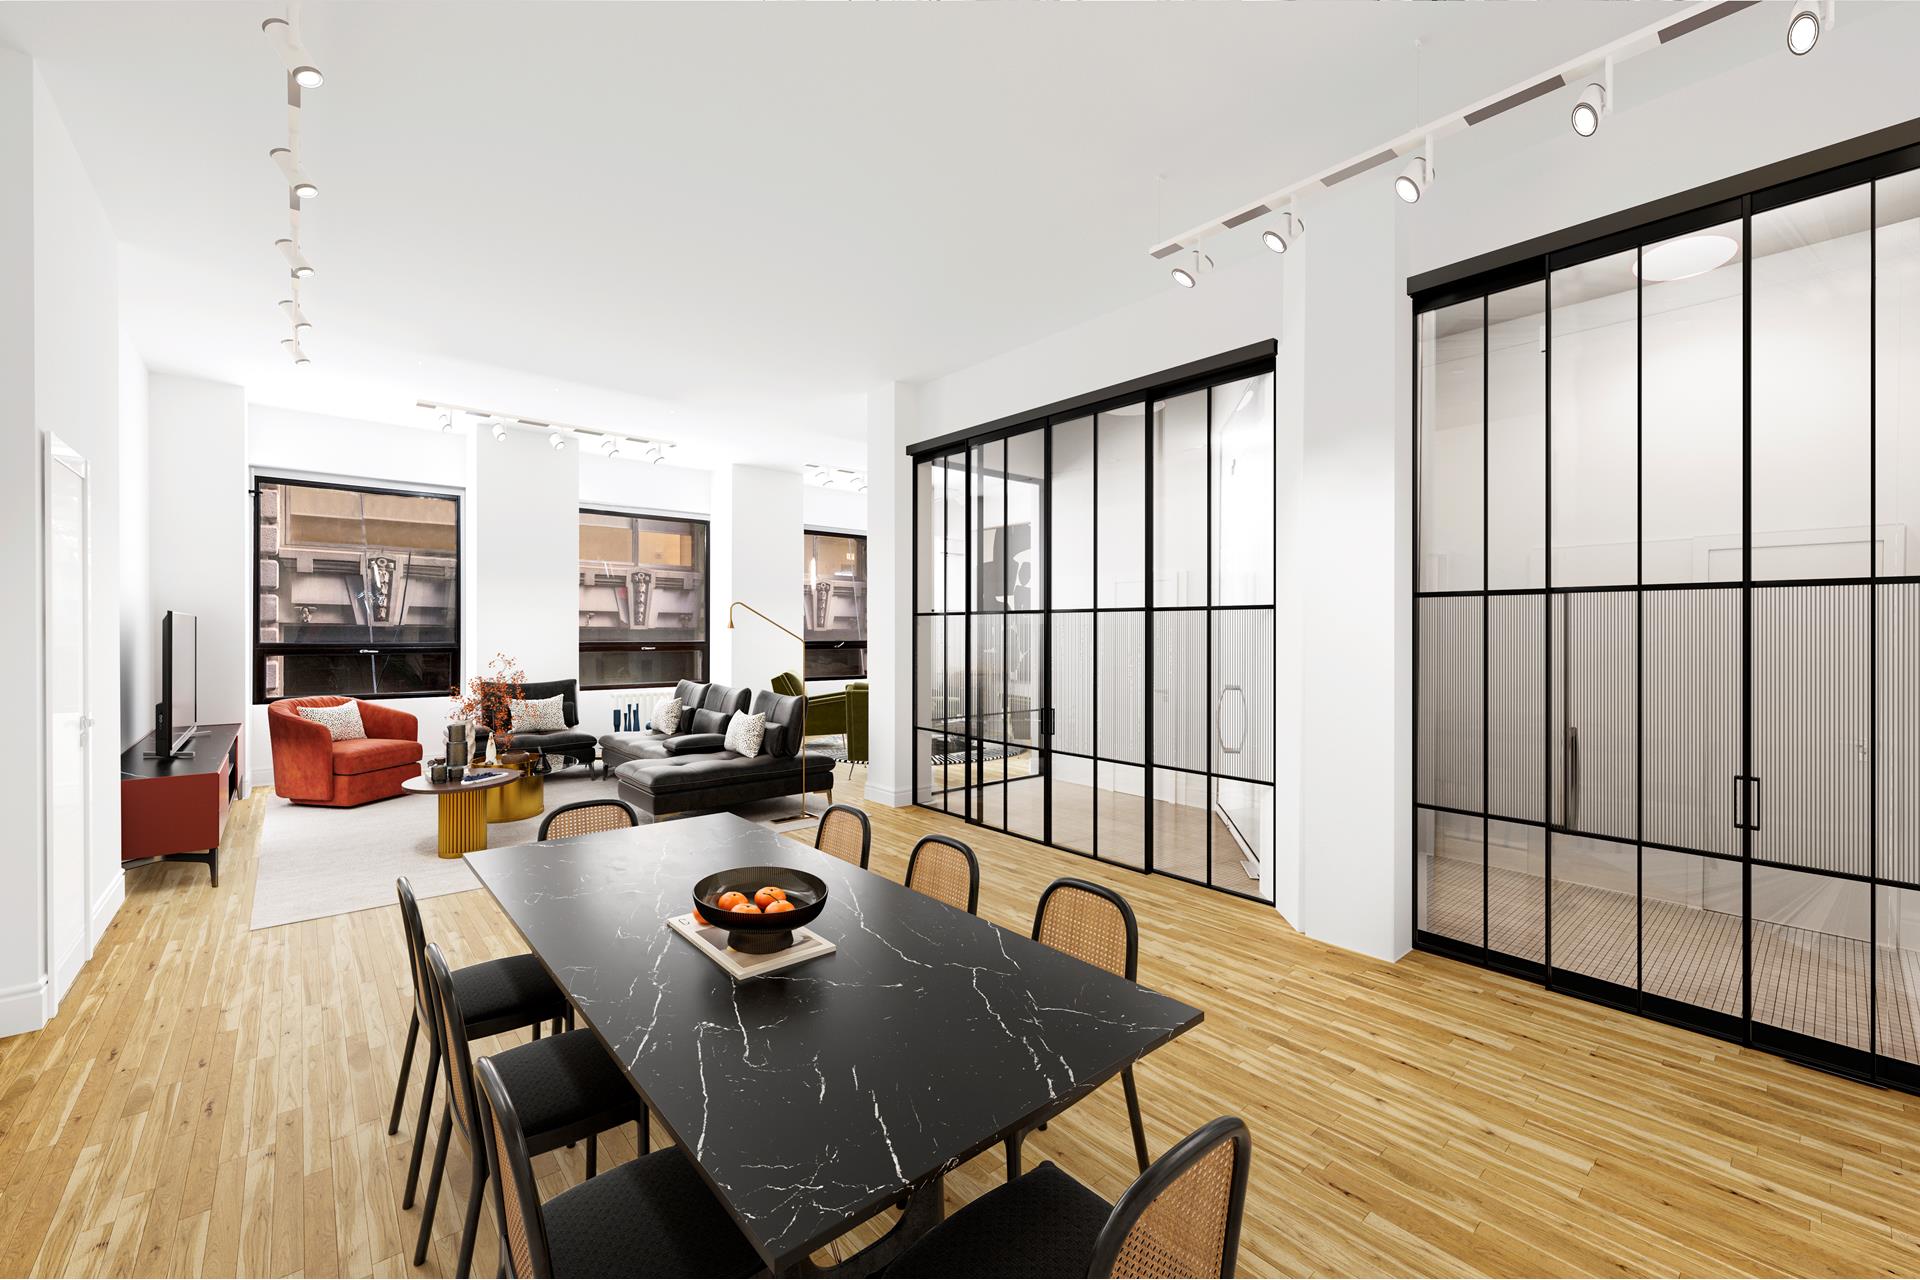 50 Pine Street 2, Financial District, Downtown, NYC - 4 Bedrooms  
3 Bathrooms  
8 Rooms - 